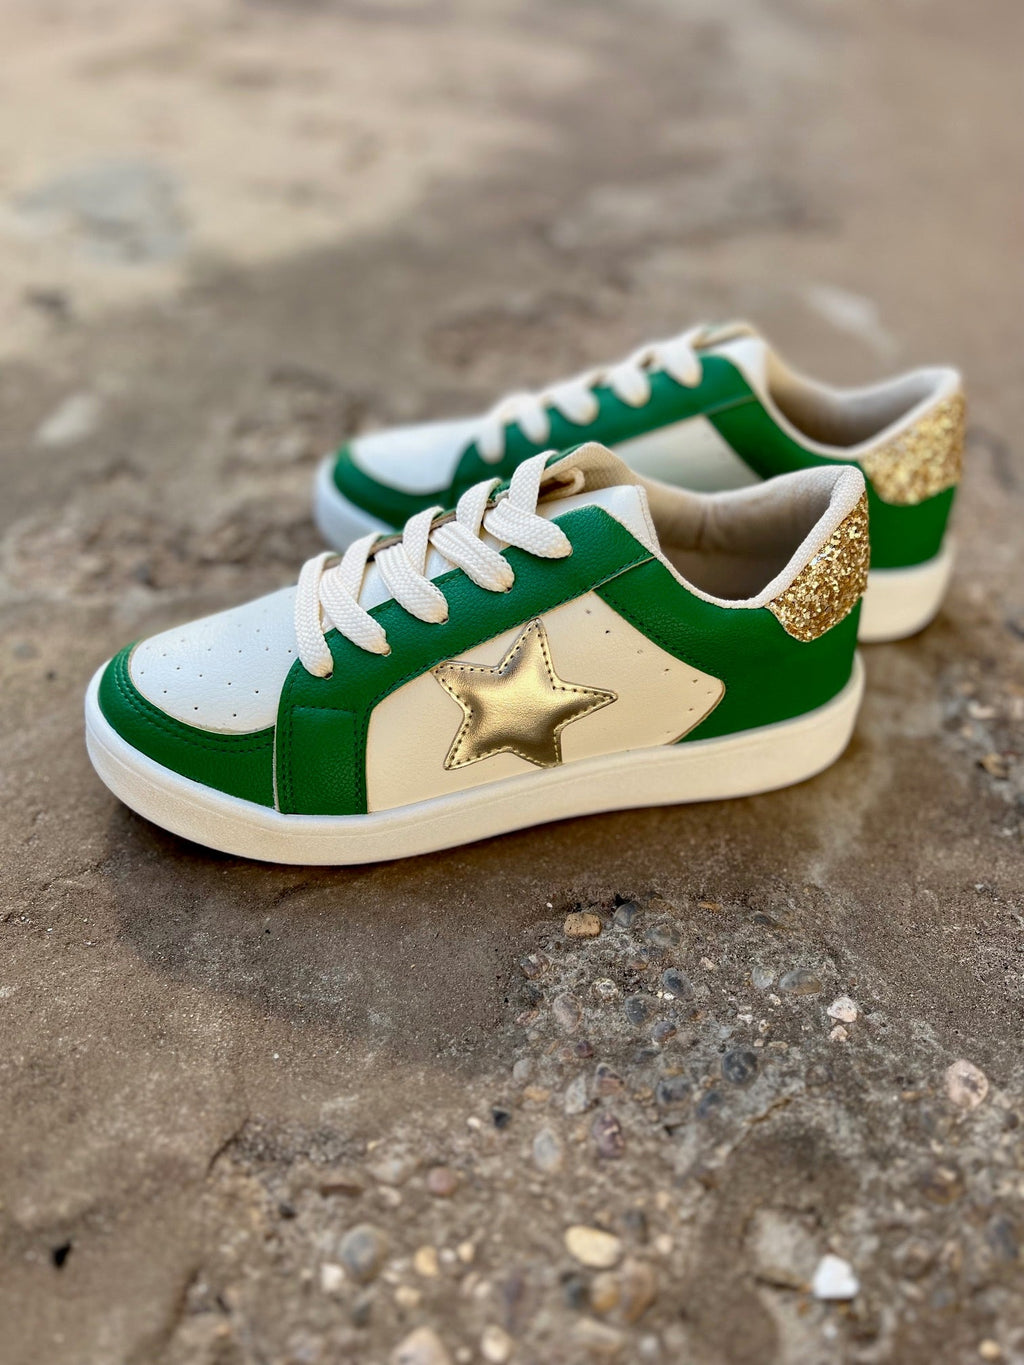 Green and white sneakers. Gold sneakers with a star on the side. Green sneakers. Golden Goose dupes. Affordable sneakers. Trendy sneakers. Game day sneakers. School spirit sneakers. Cheerleading sneakers. White sneakers. Gold star sneakers. Shoes. Sneakers. Women's shoes. Boutique. Women's boutique. Trendy boutique. 